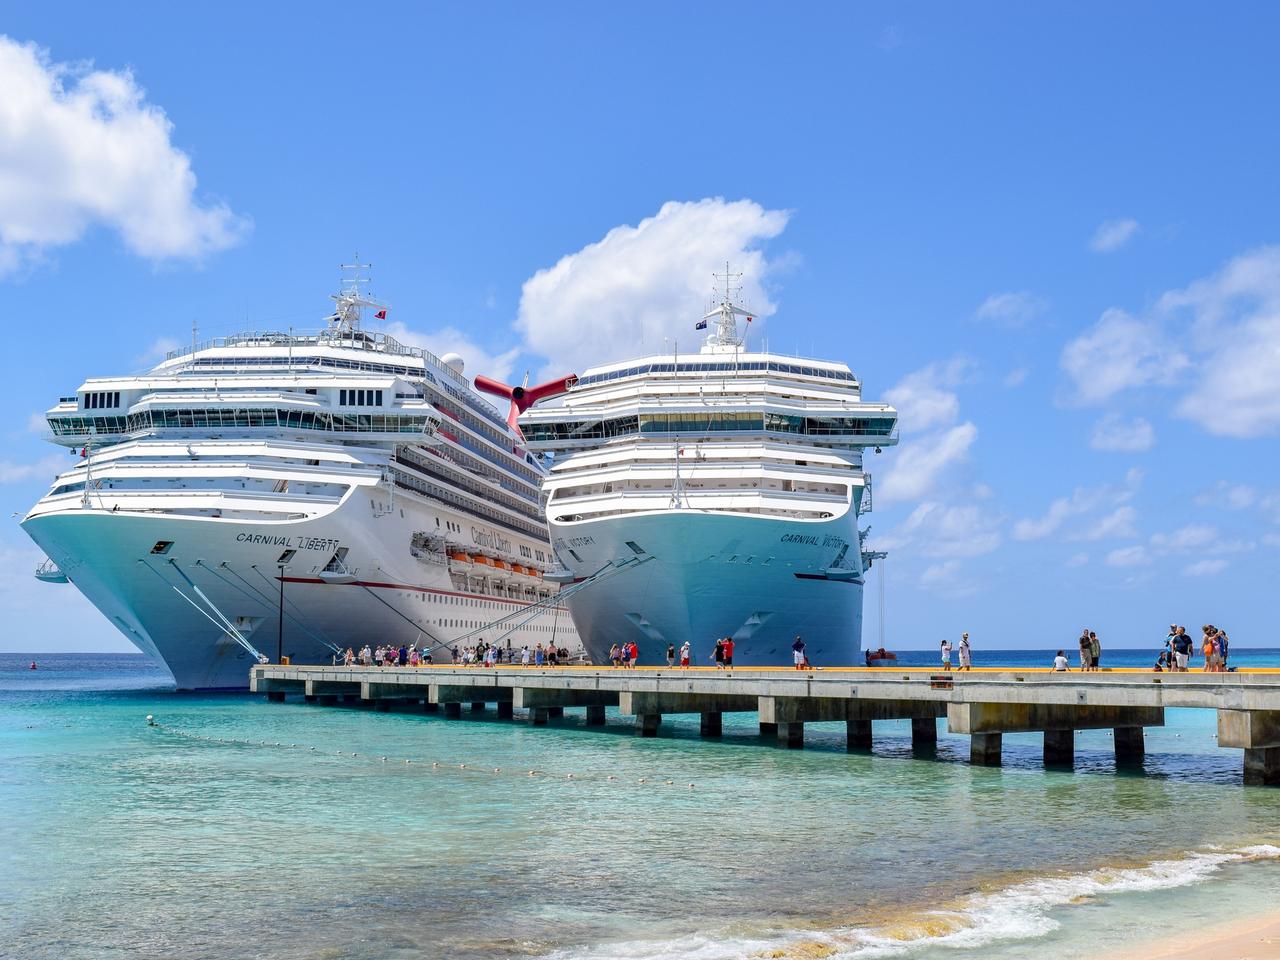 Carnival Cruise Ships in Turks and Caicos